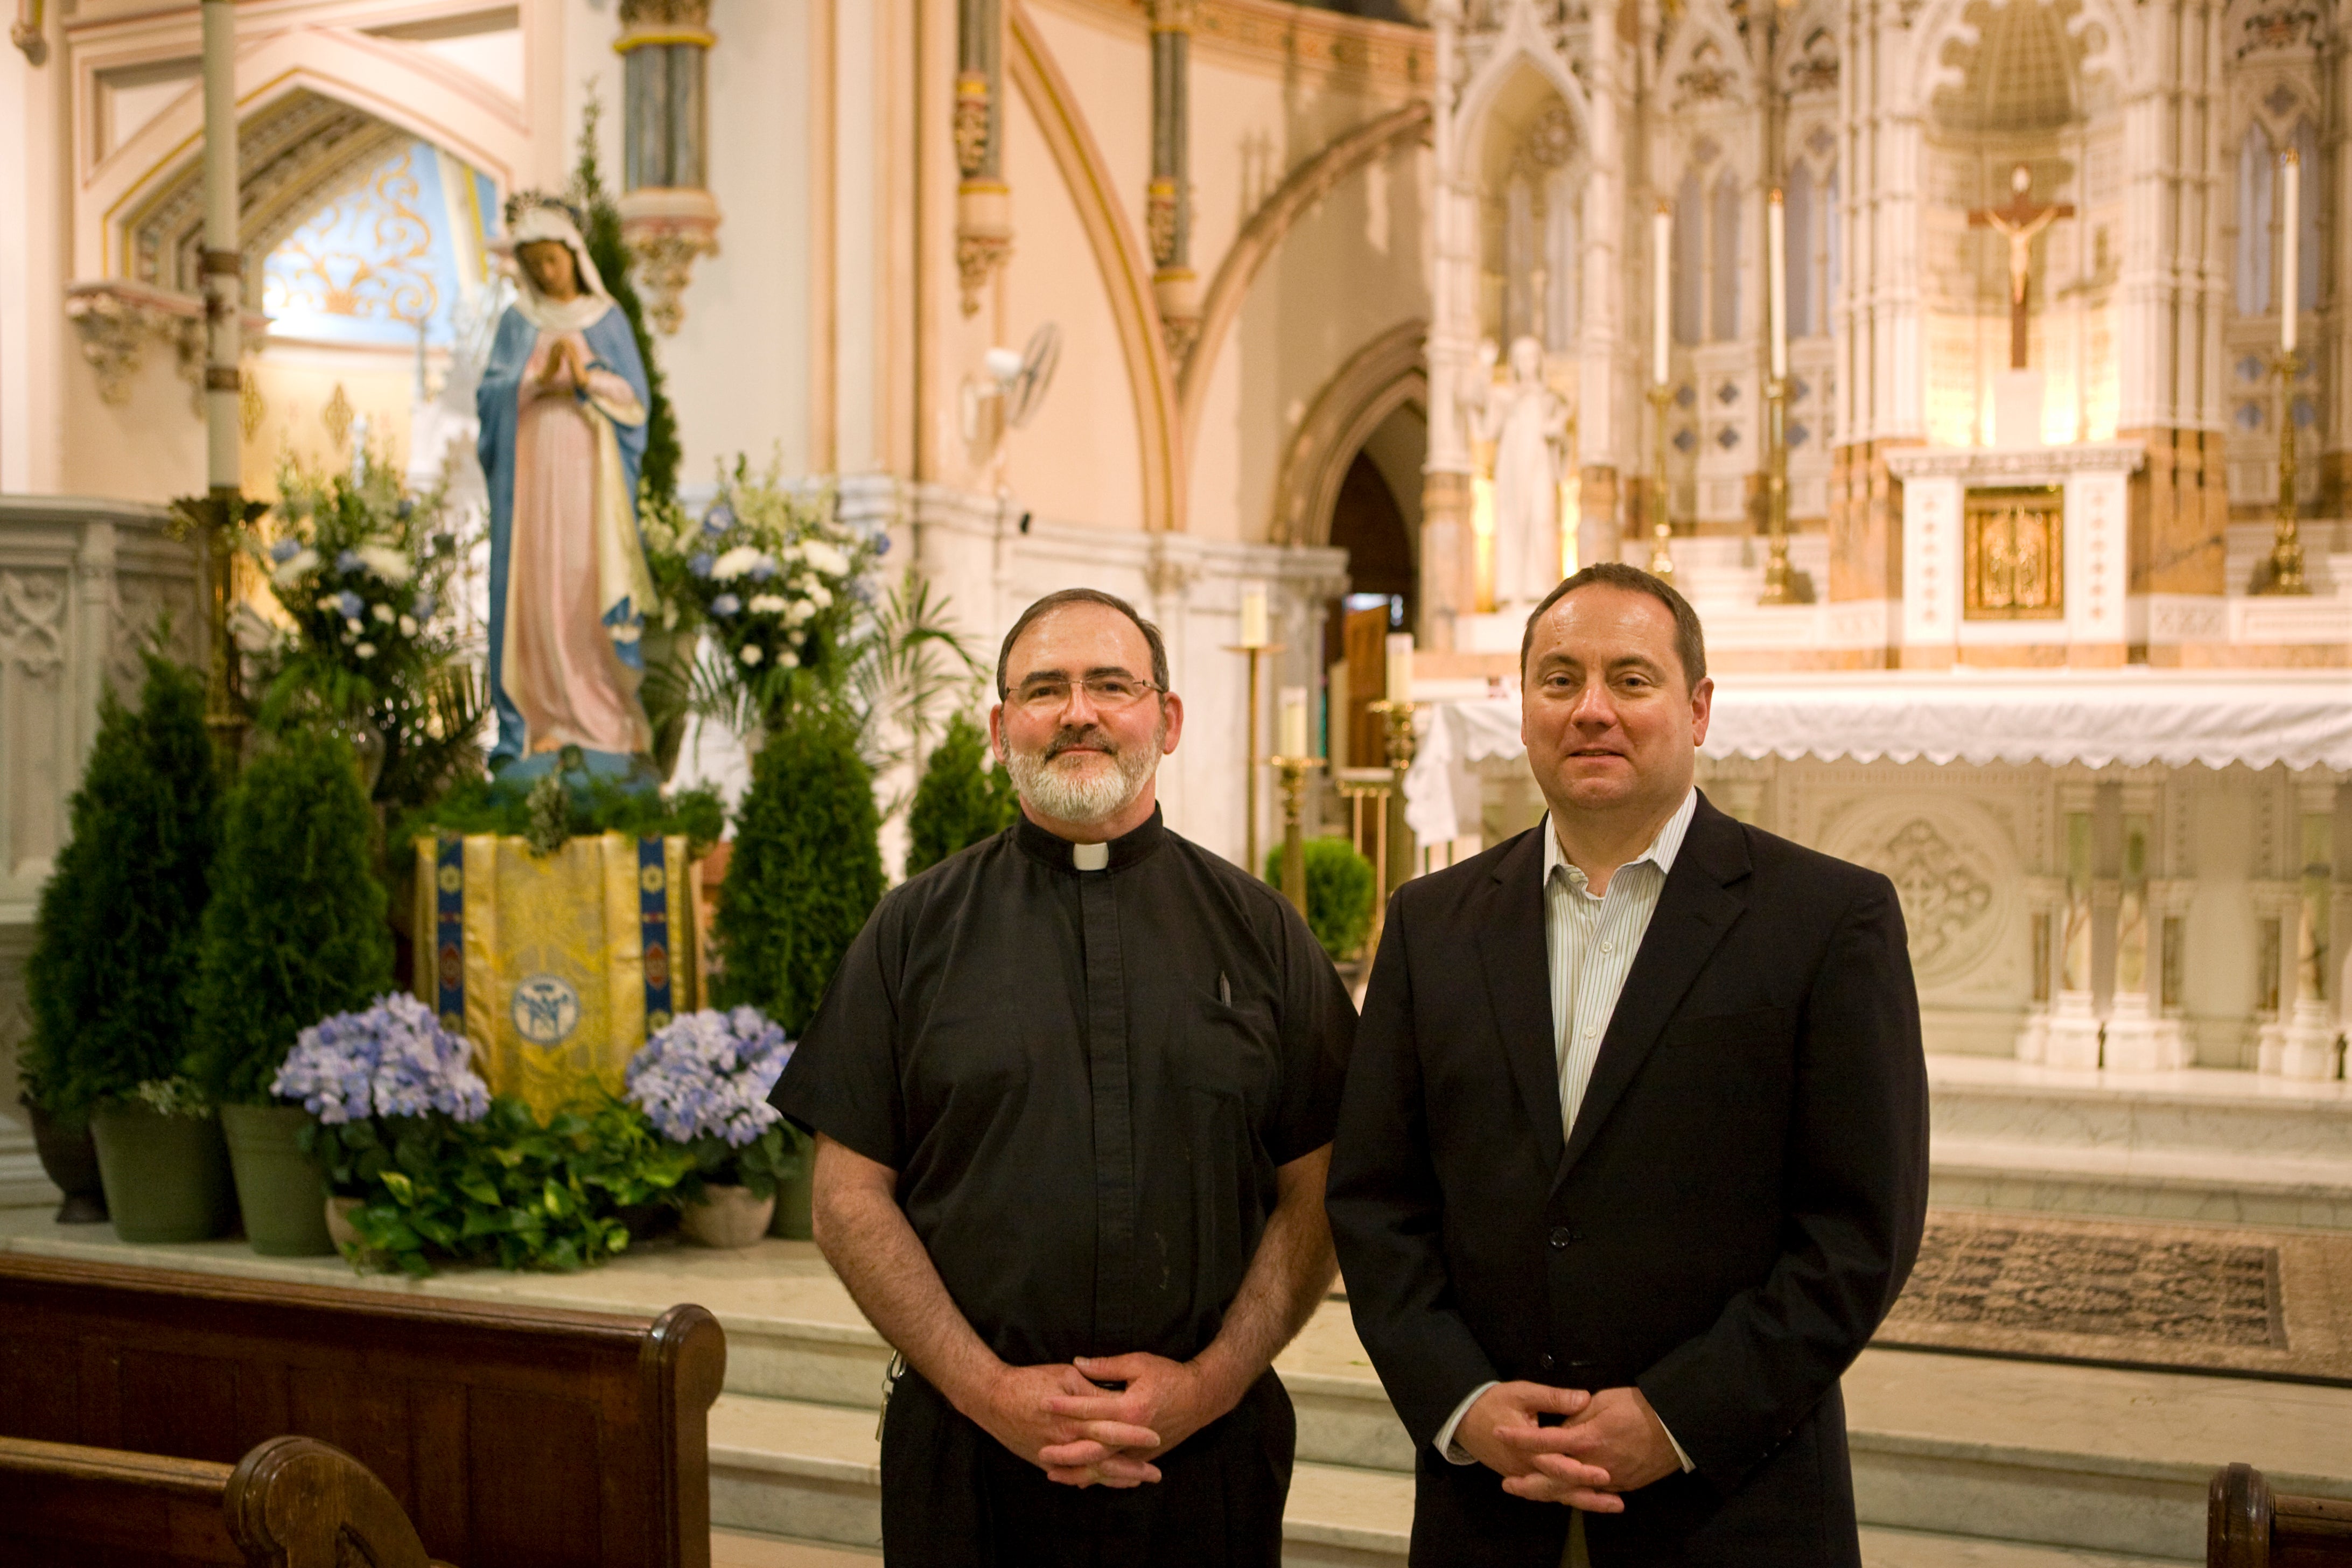 Father Kevin Lawrence (left) and Rich Van Fossen in the sanctuary of Saint John the Baptist, 2015 | Credit: Bradley Maule